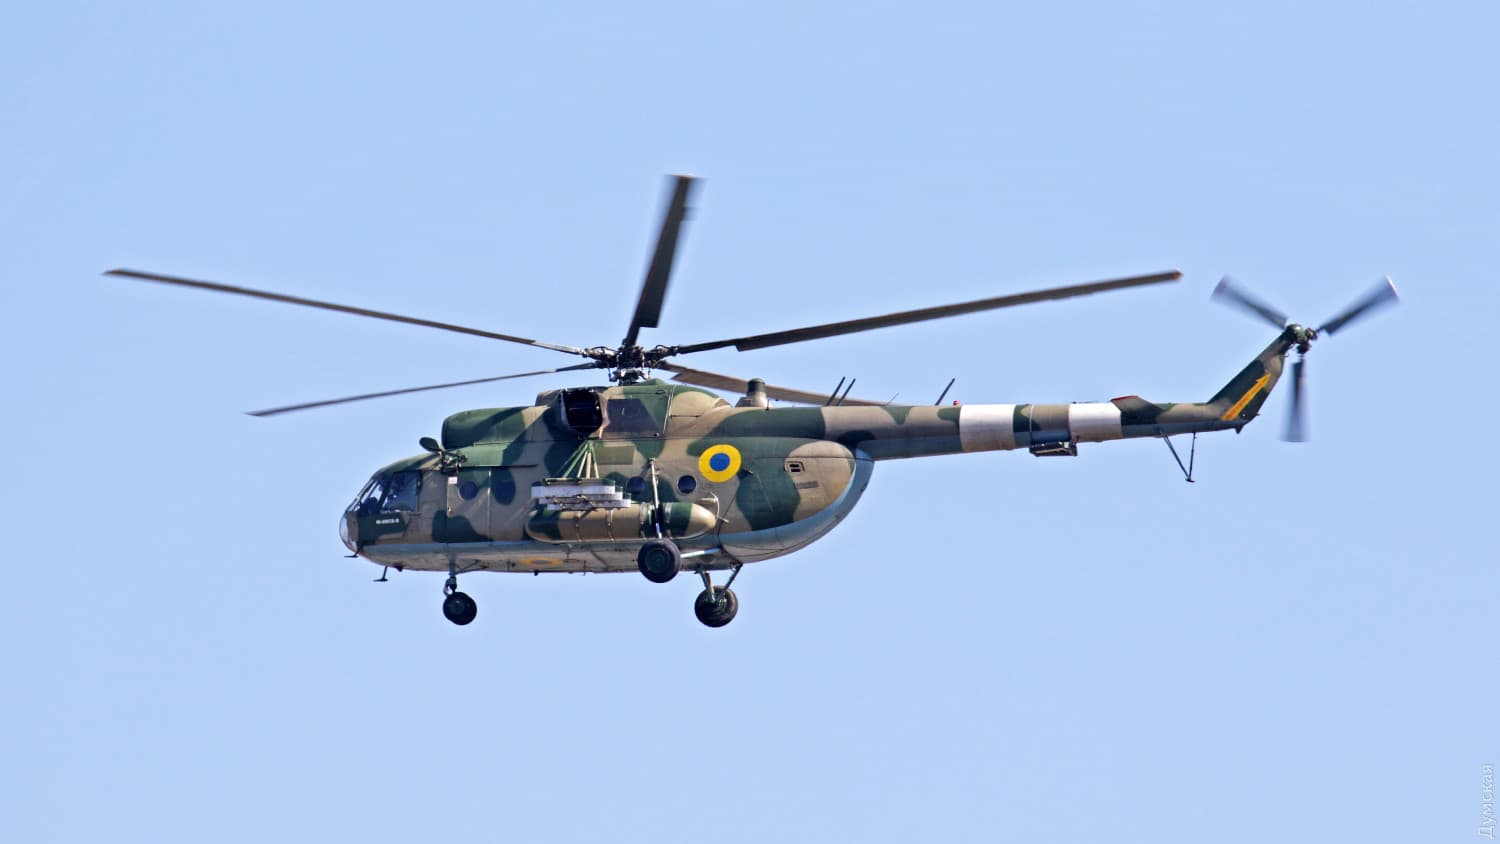 Ukraine will receive "African" Mi-8 helicopters for $500,000,000